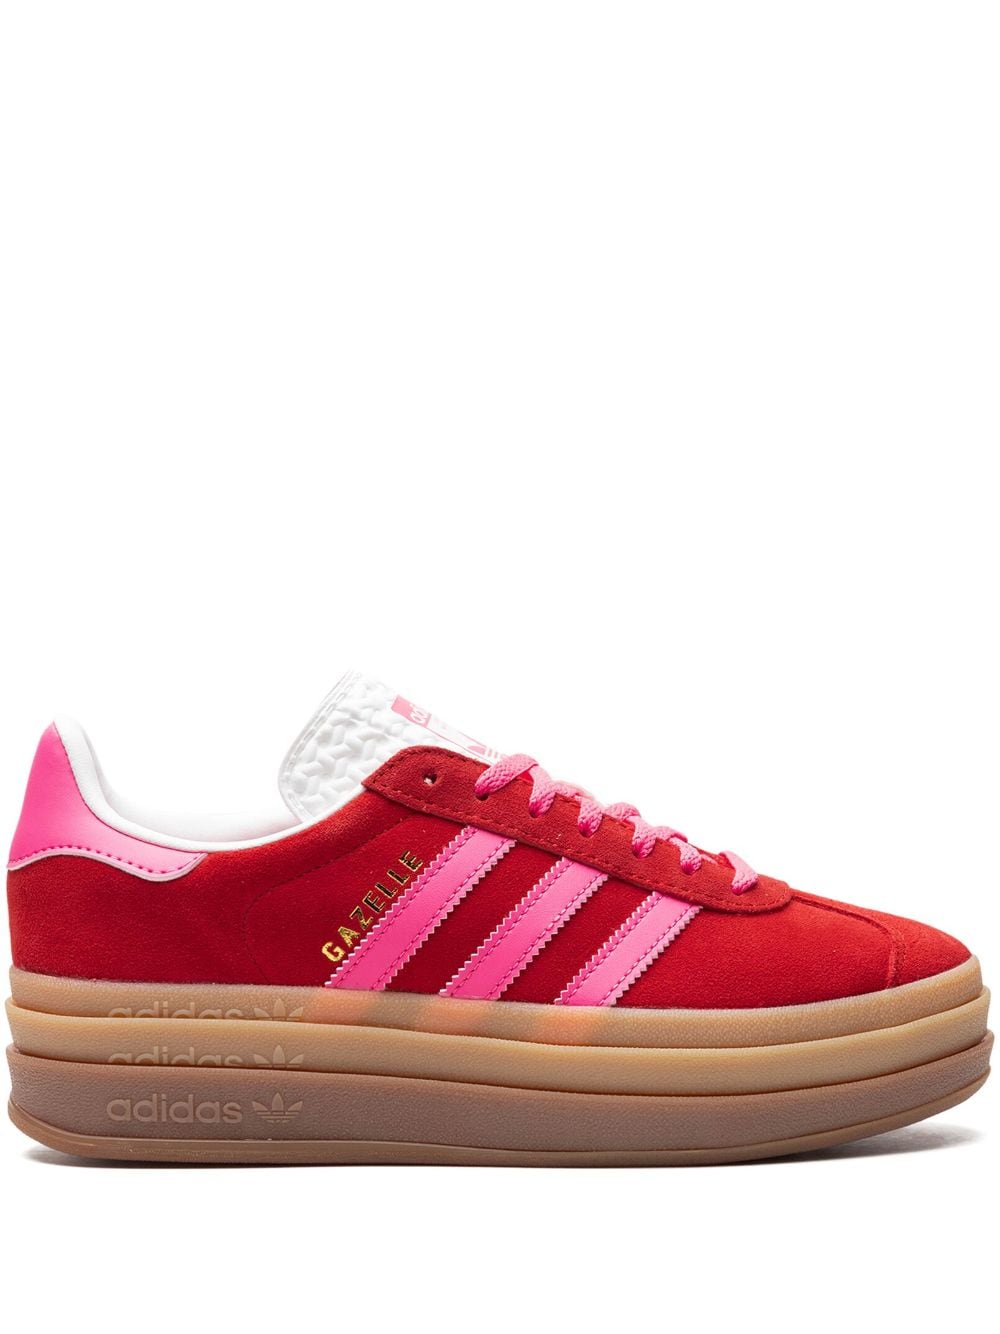 Adidas Originals Gazelle Bold Leather Sneakers In Red